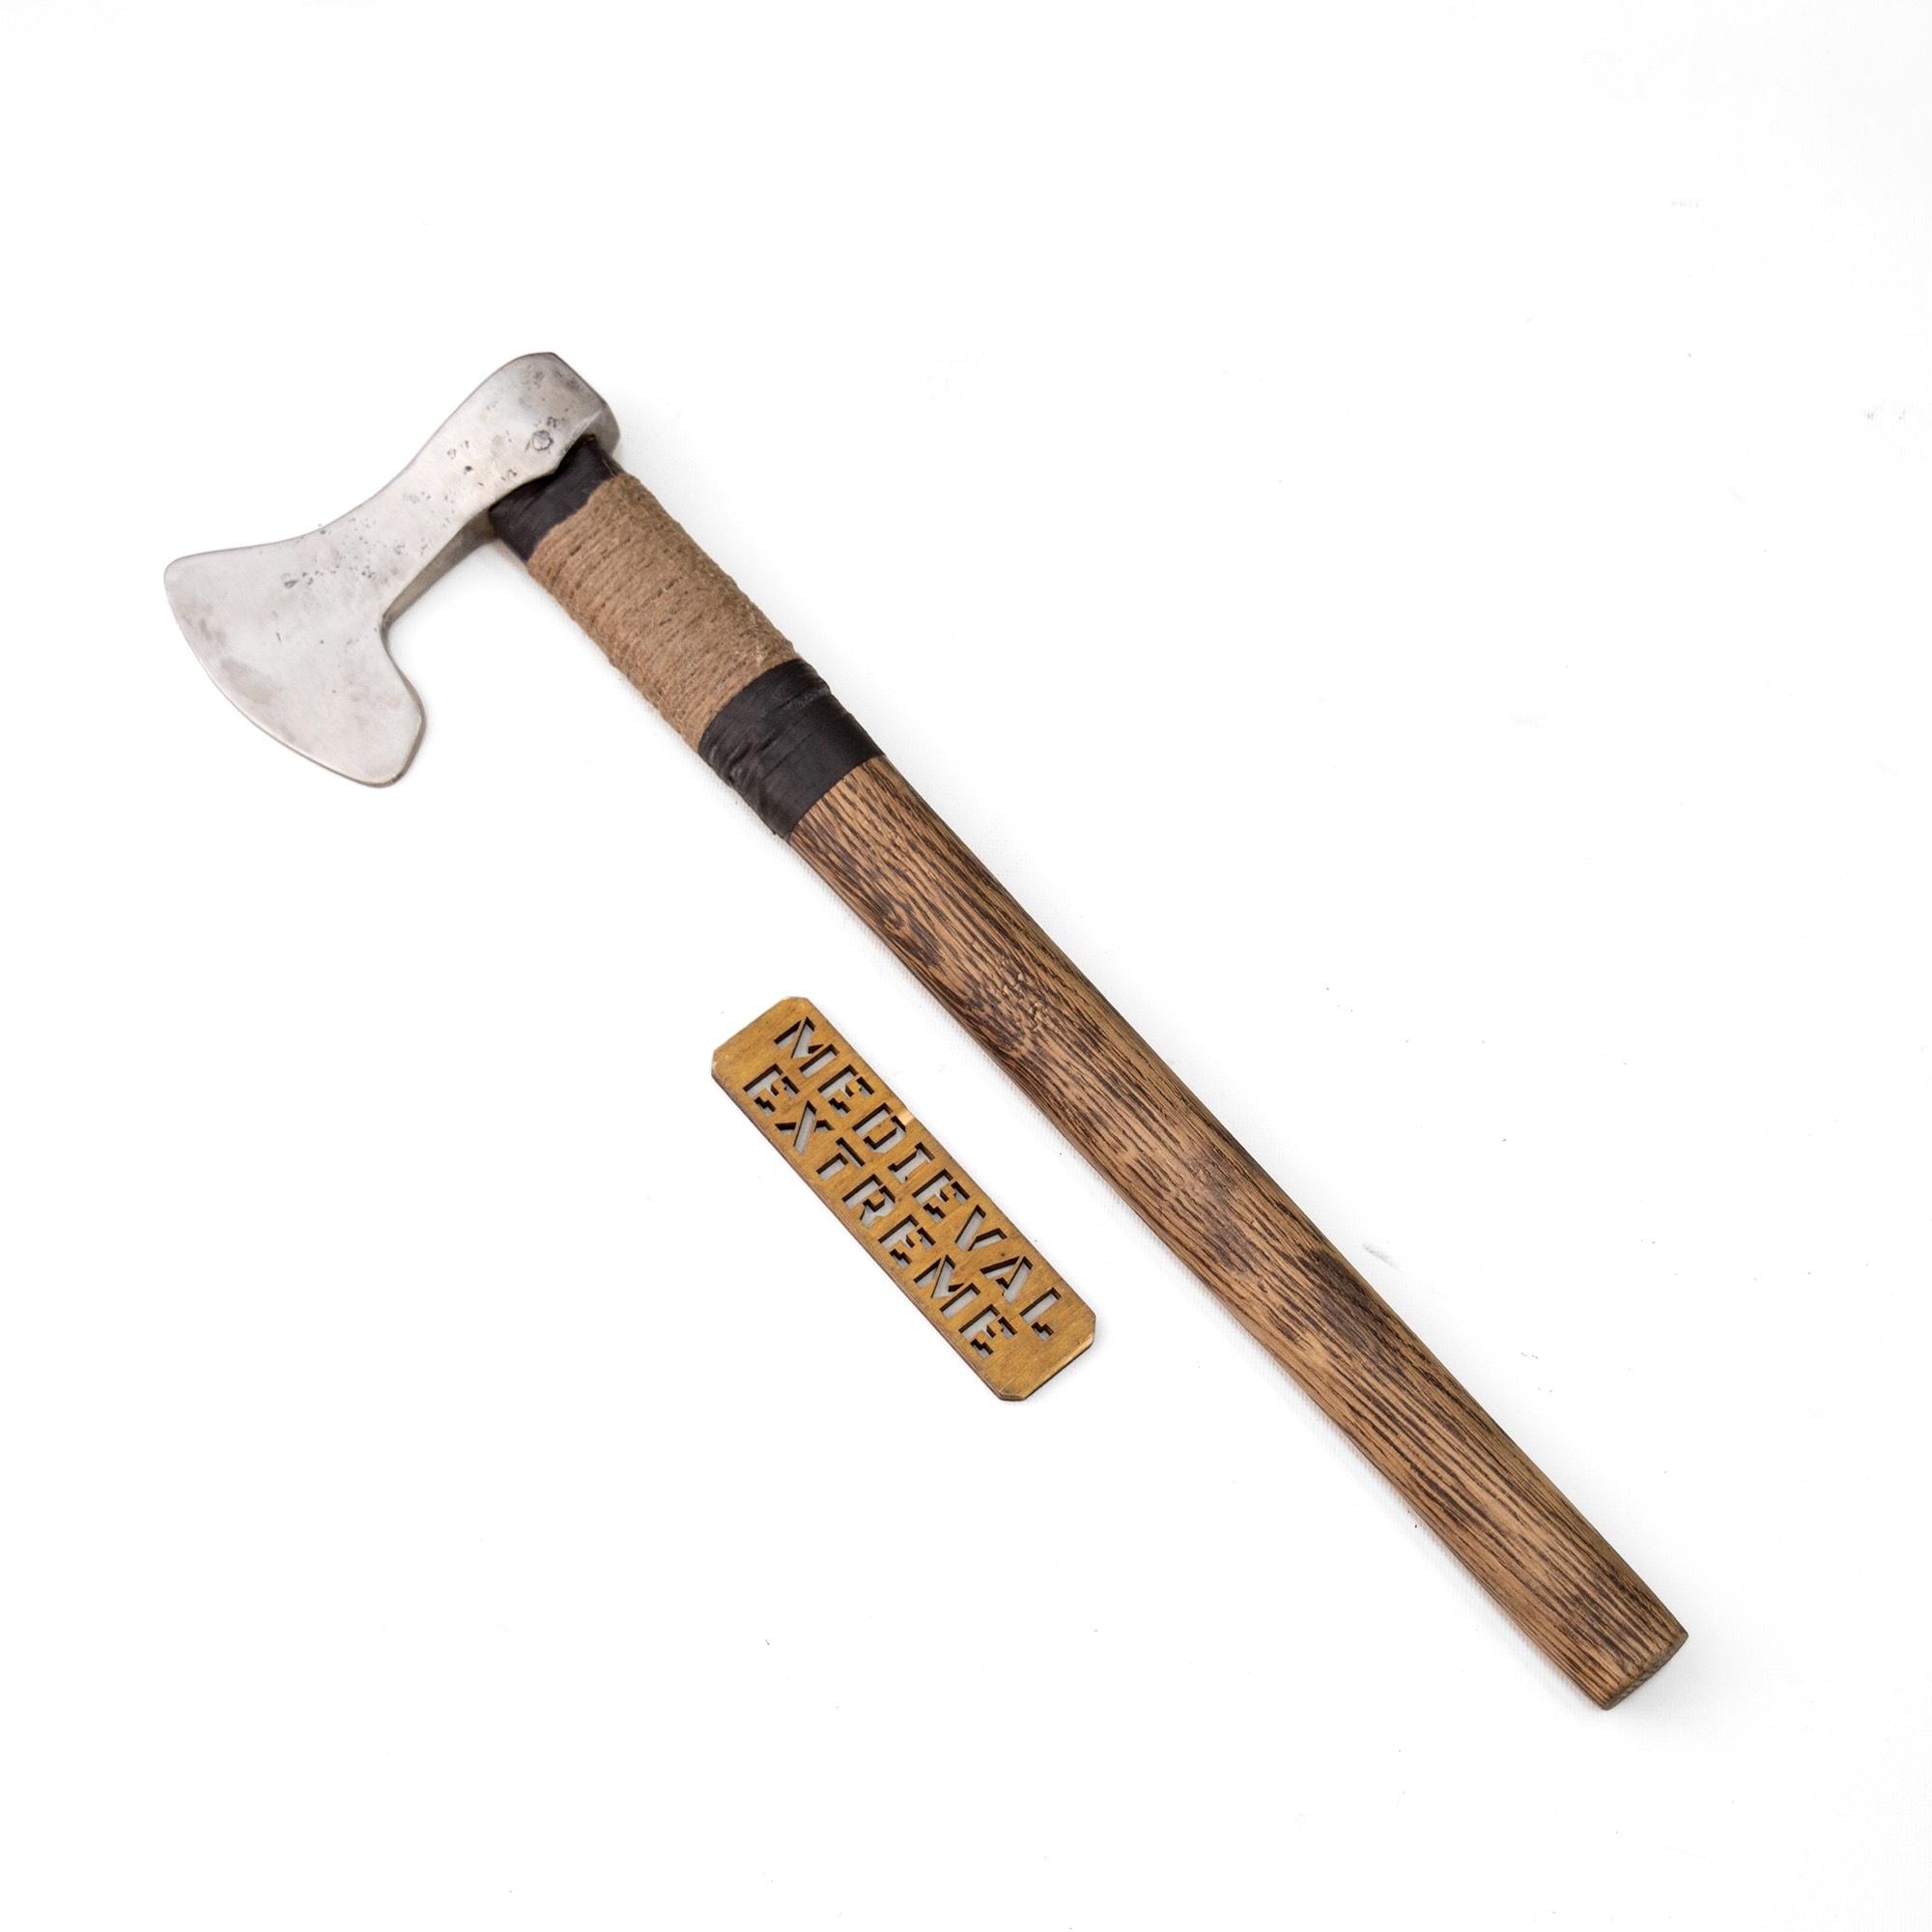 One-handed axe for medieval combat full length